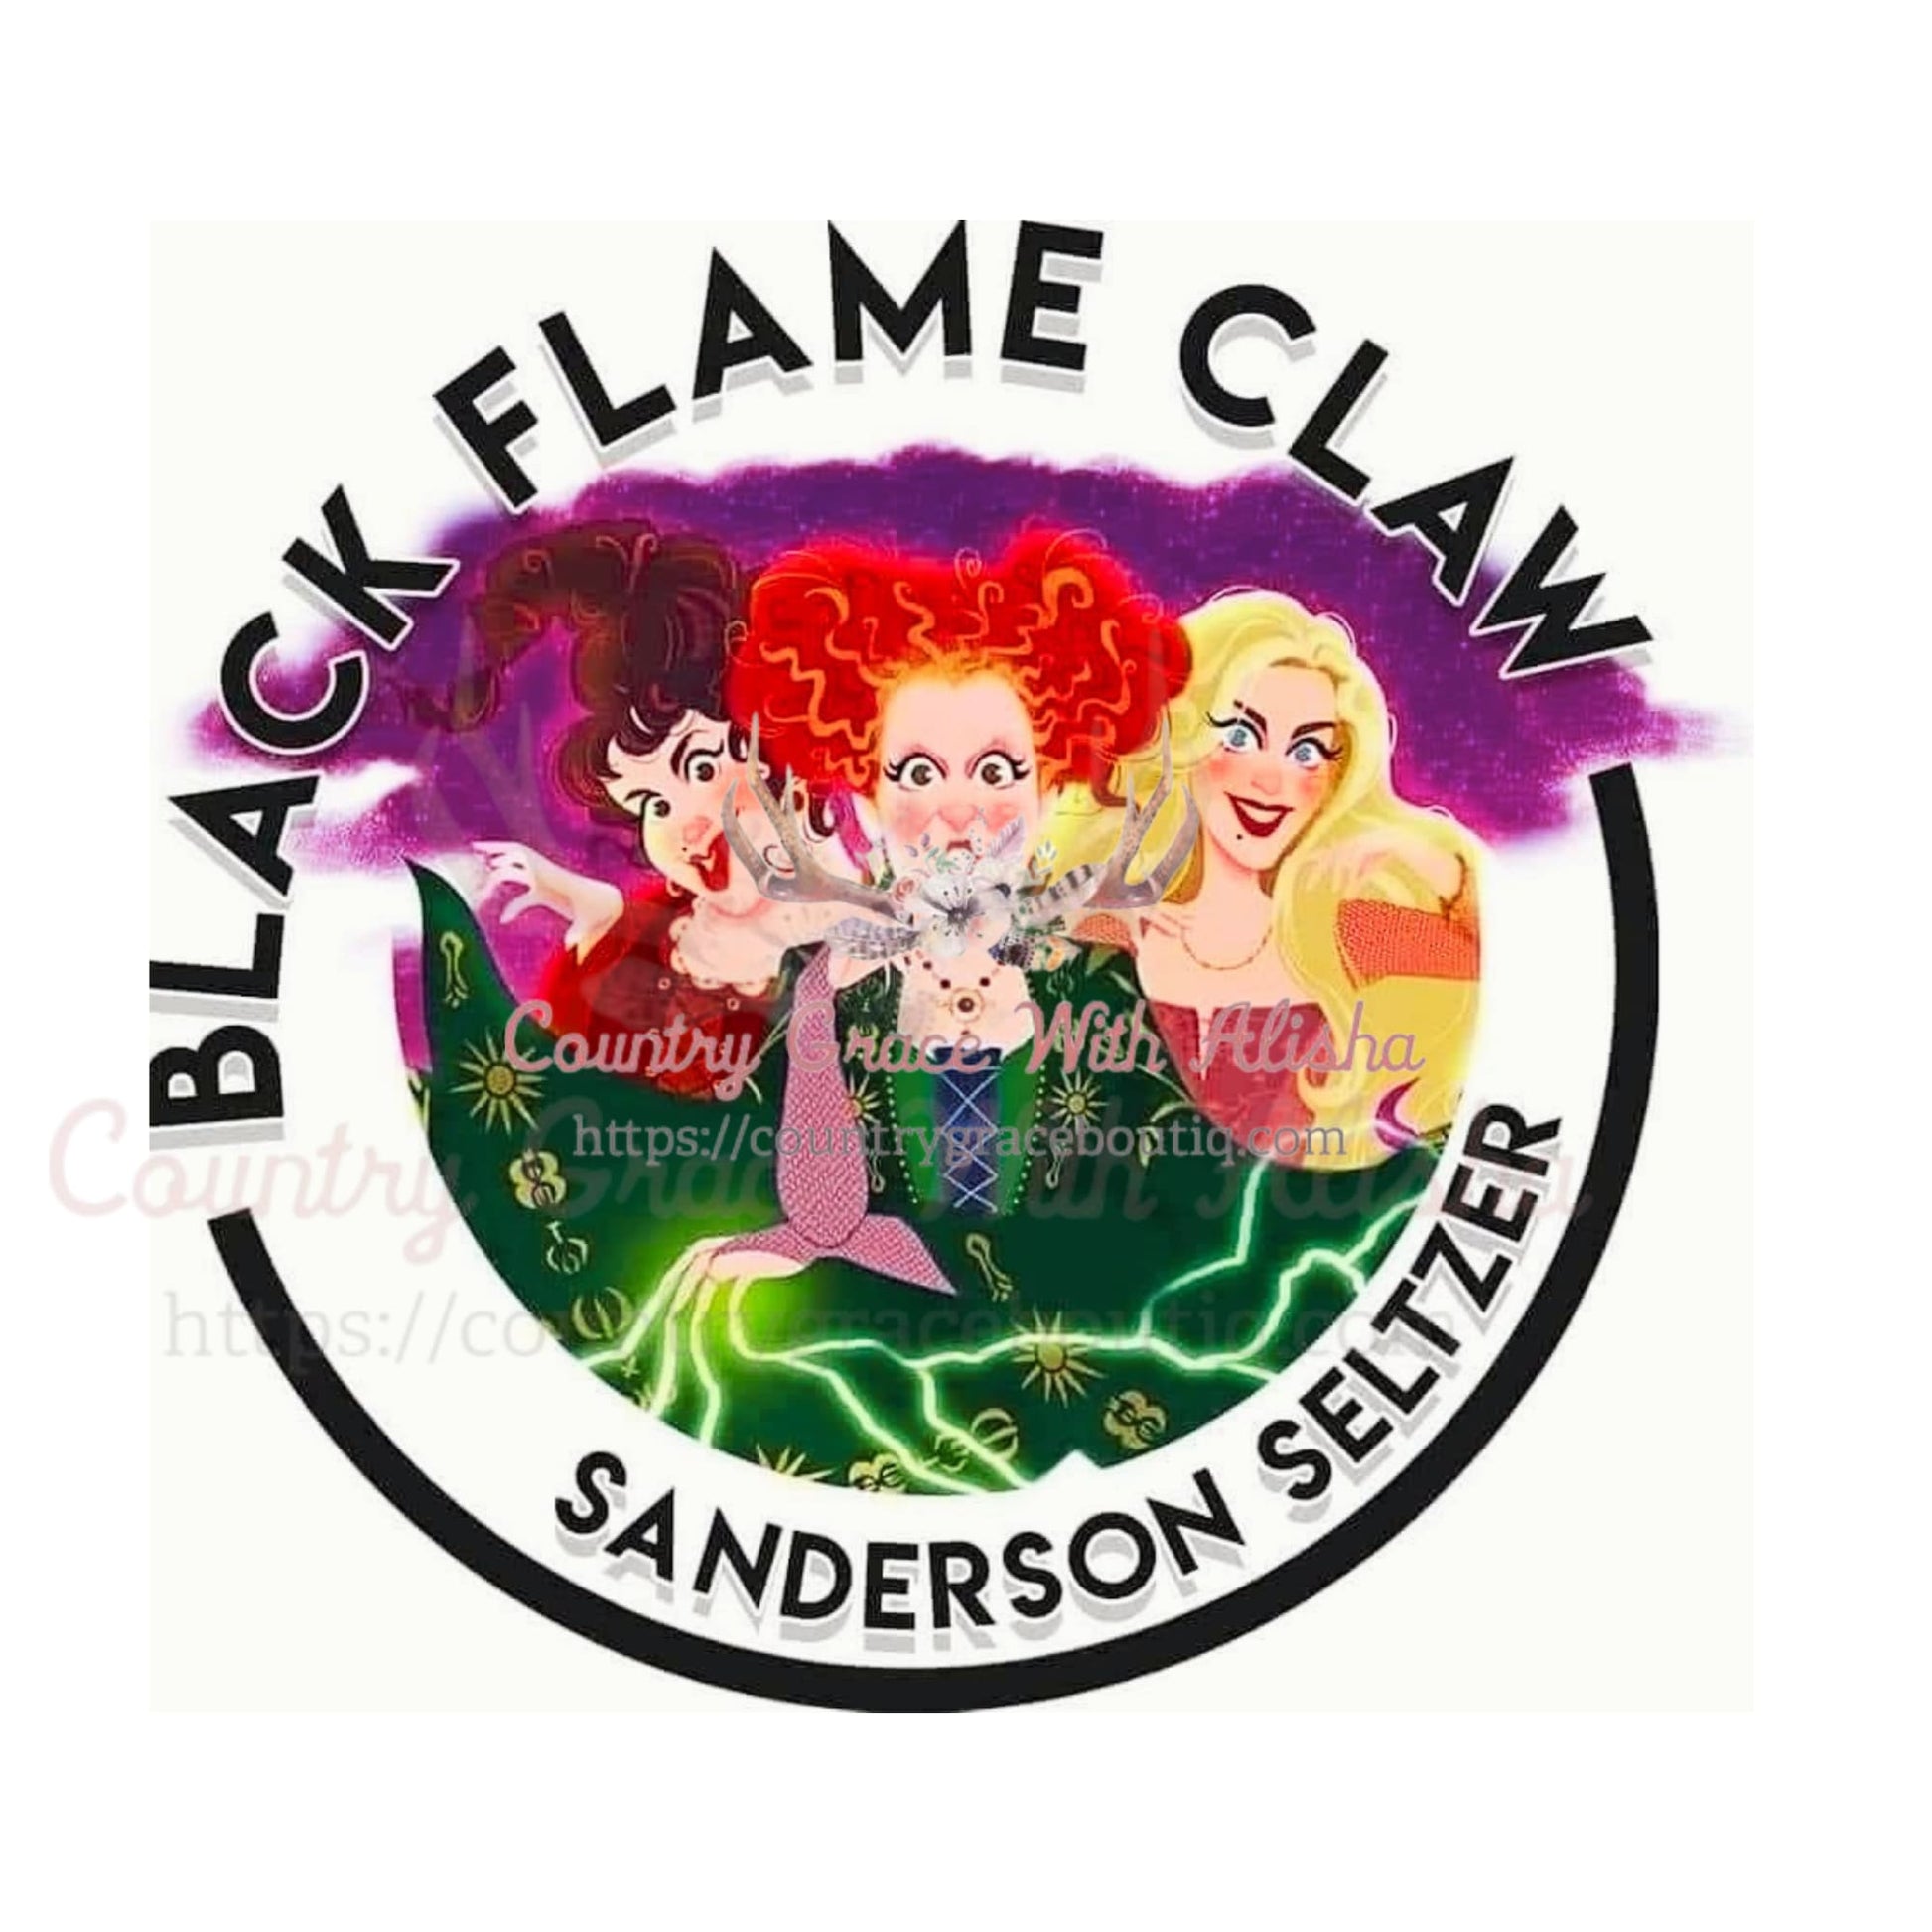 Black Flame Claw Sublimation Transfer - Sub $1.50 Country 